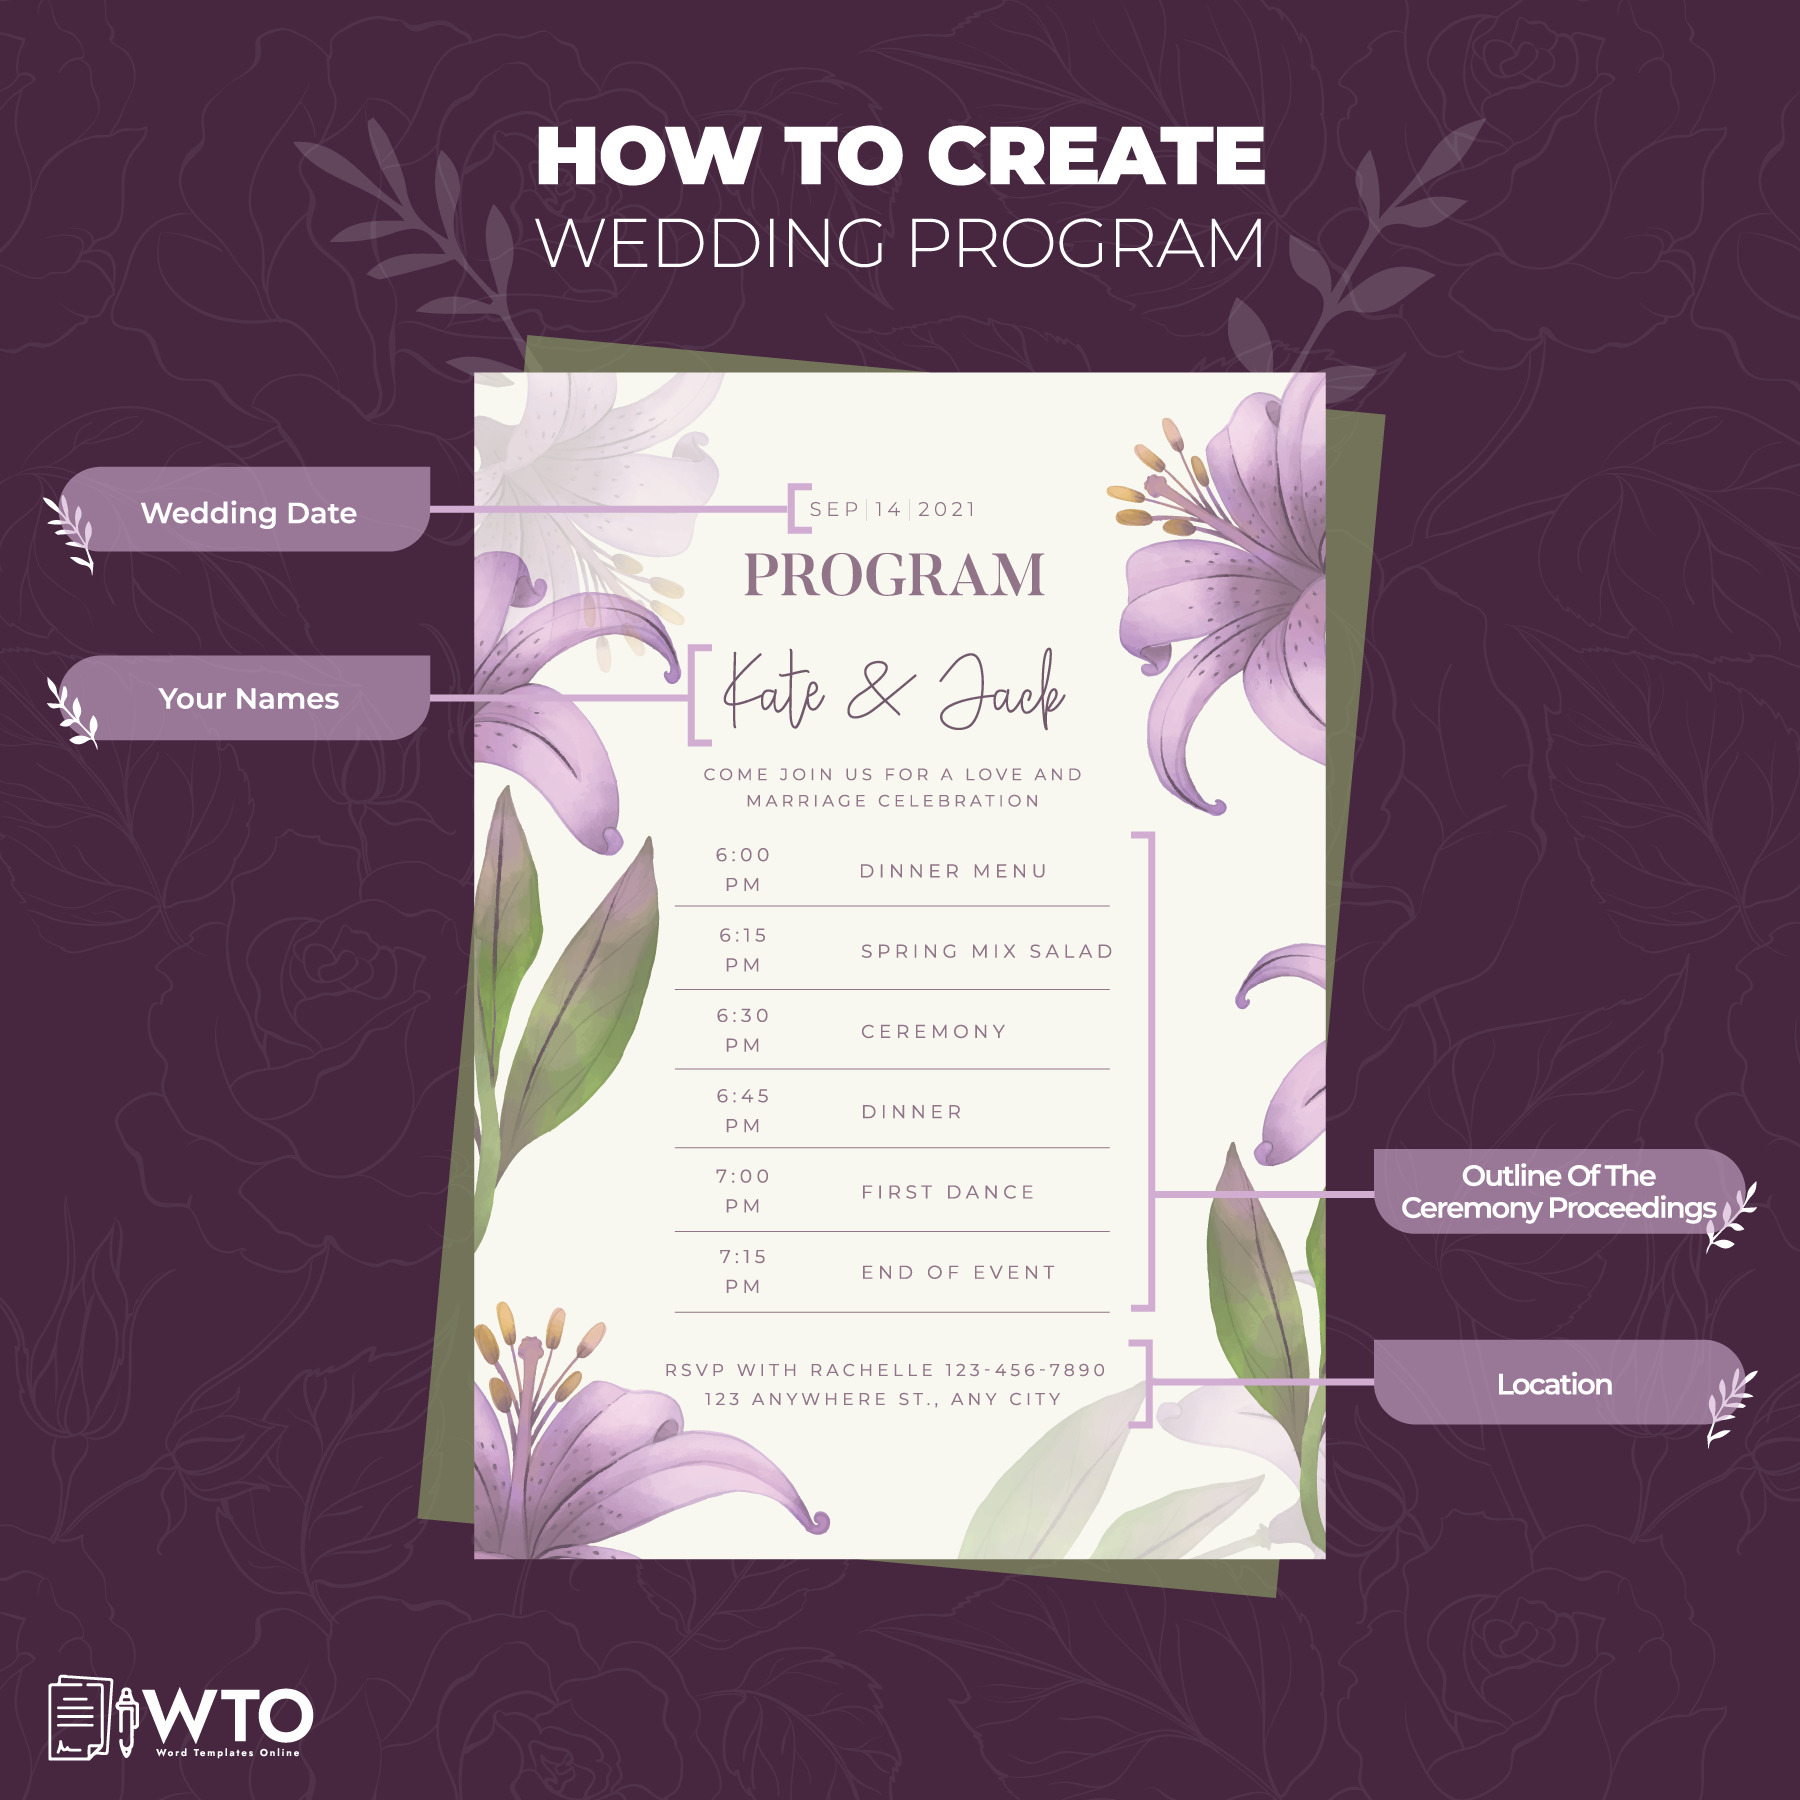 This infographic is about creating a wedding program.